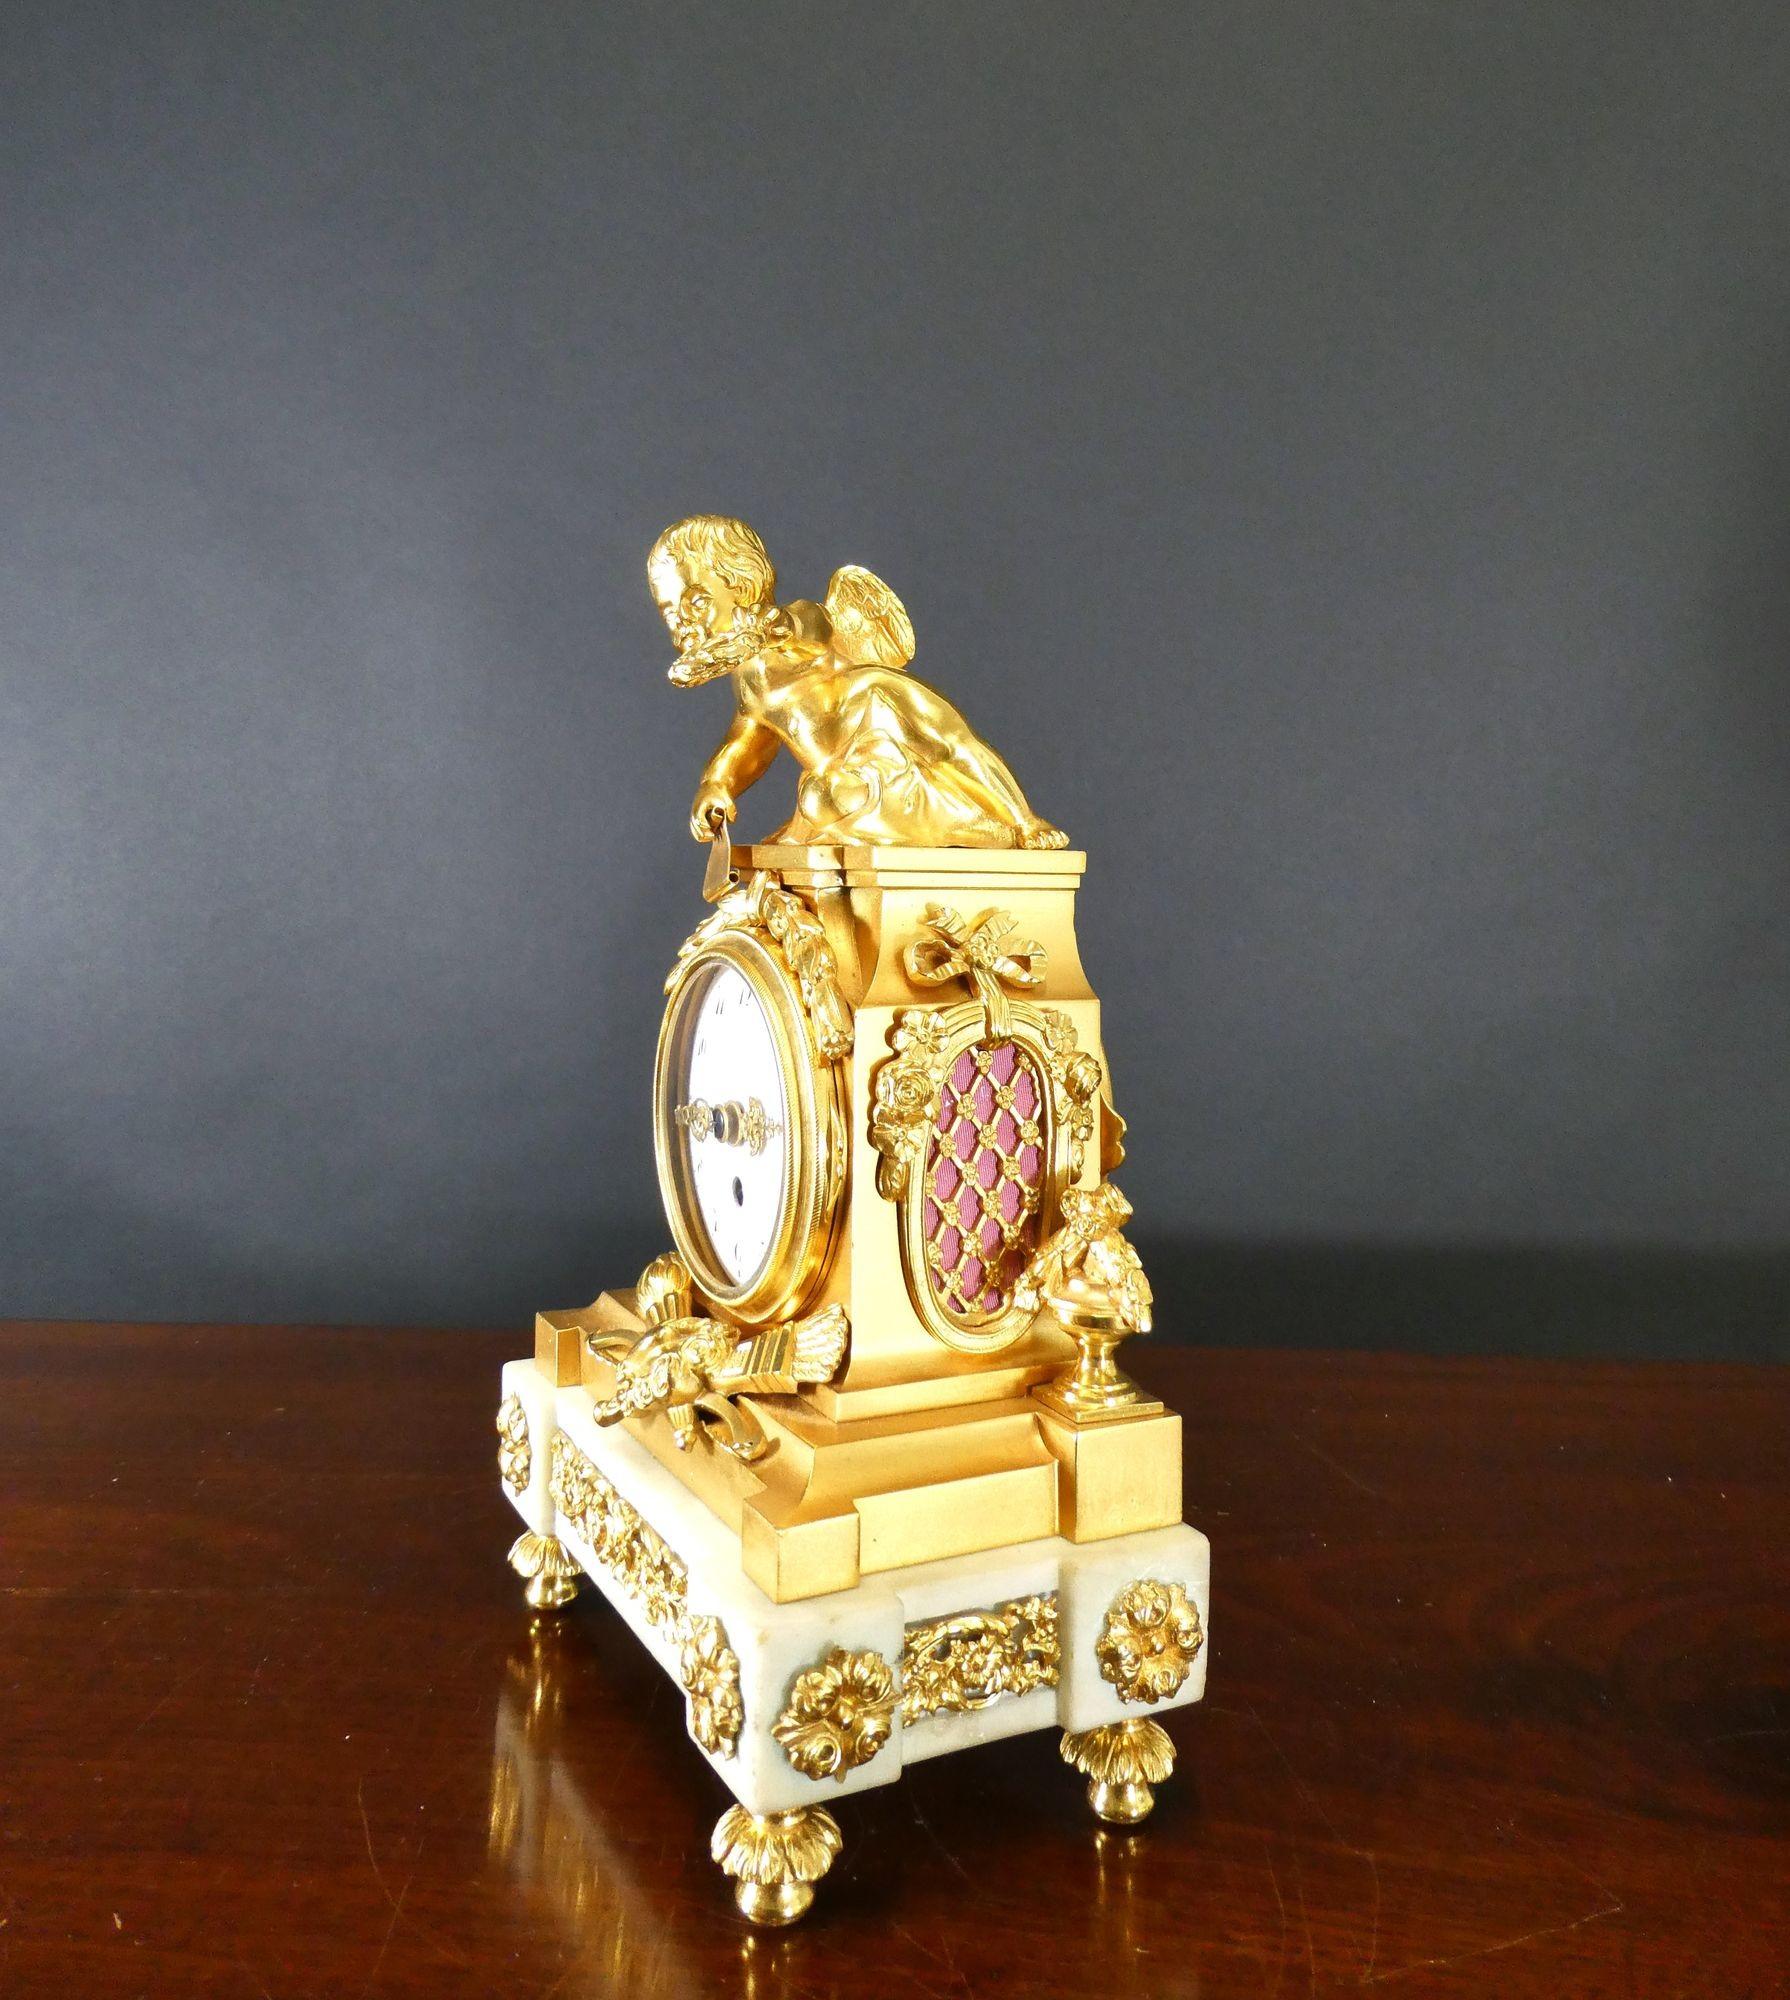 White marble and ormolu mantel clock
Housed in a white marble case with stepped plinth and applied decorative mounts and surmounted by a cherub, resting on decorative feet.

Enamel dial with Arabic numerals and original hands.
Eight day movement